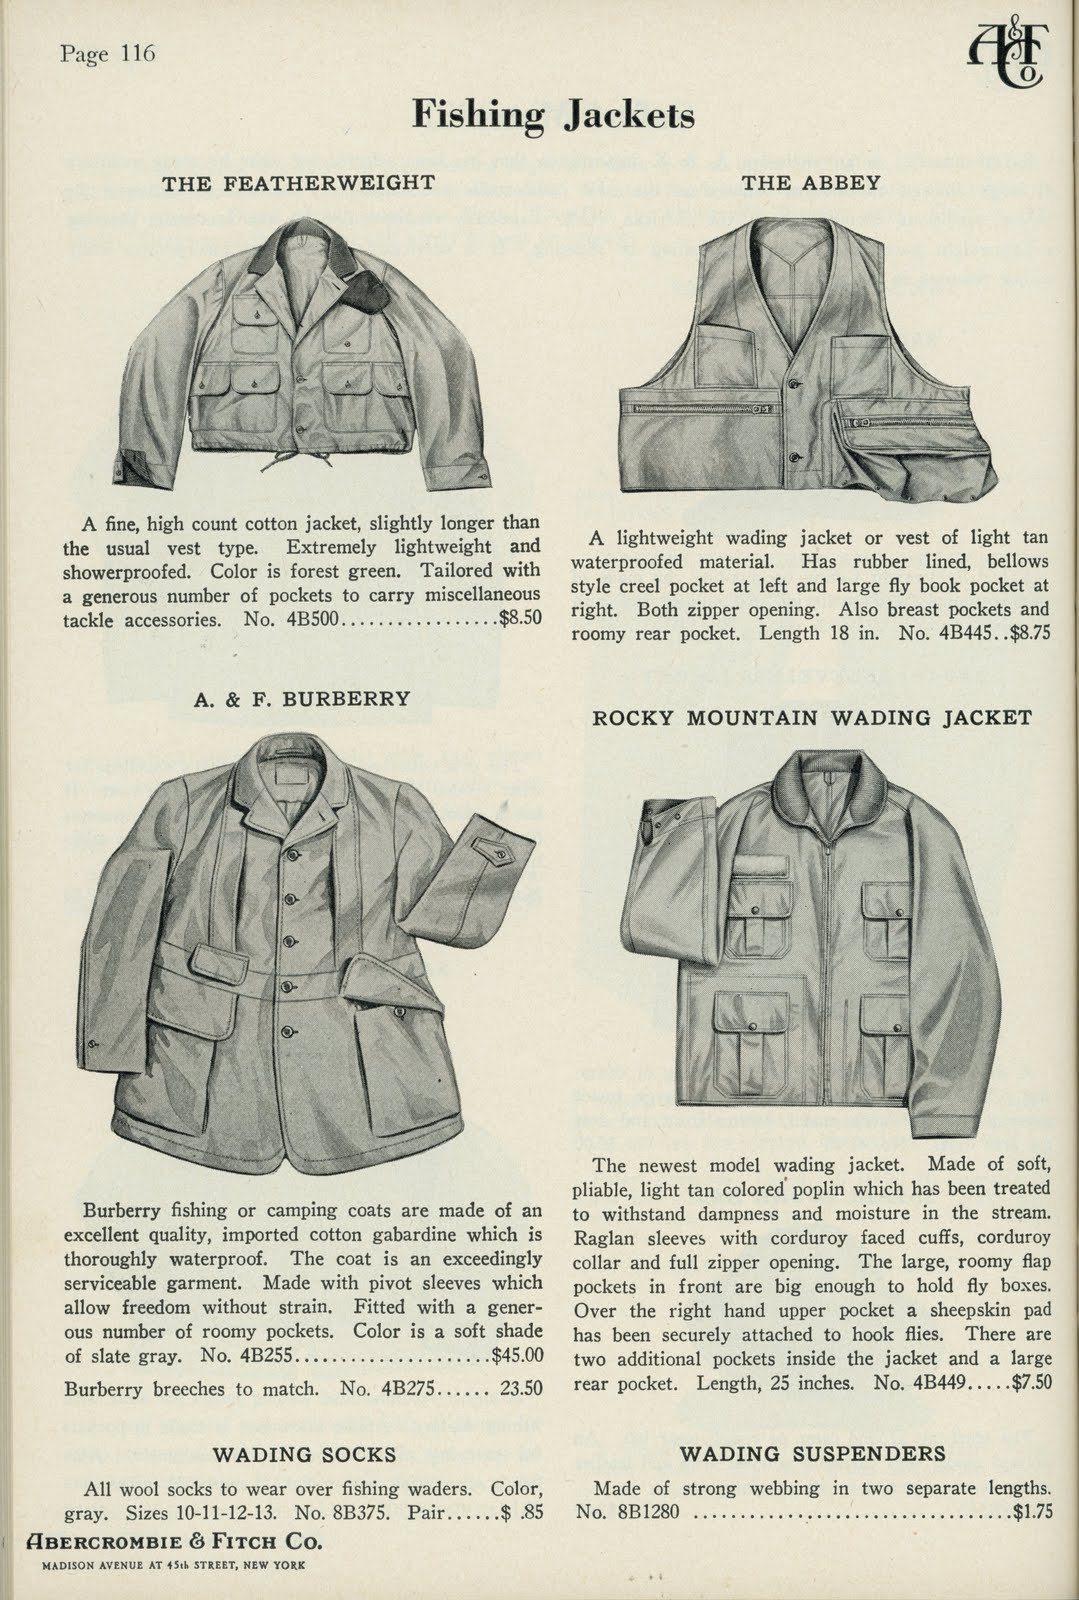 Shopping from 1939: Abercrombie and Fitch | Archival Blog